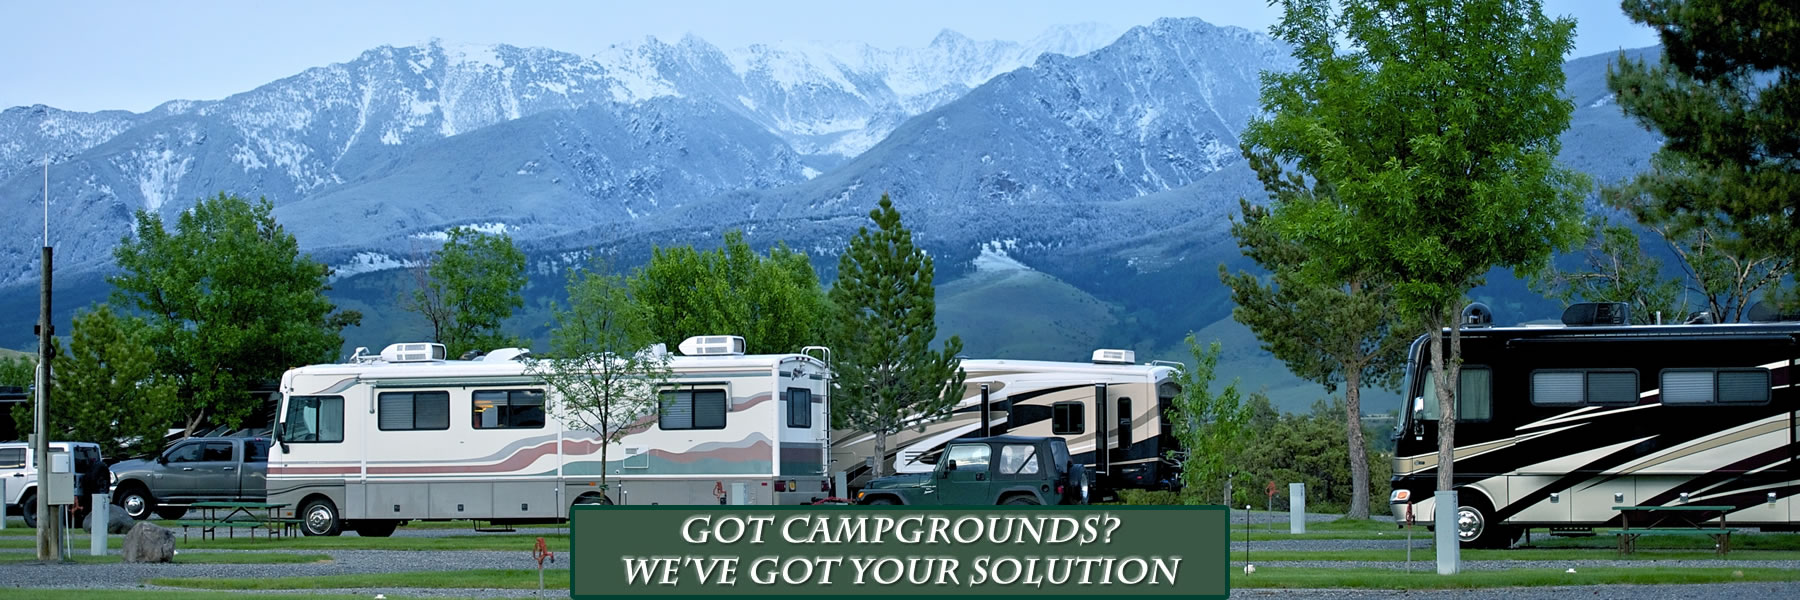 Campground and RV park reservation software